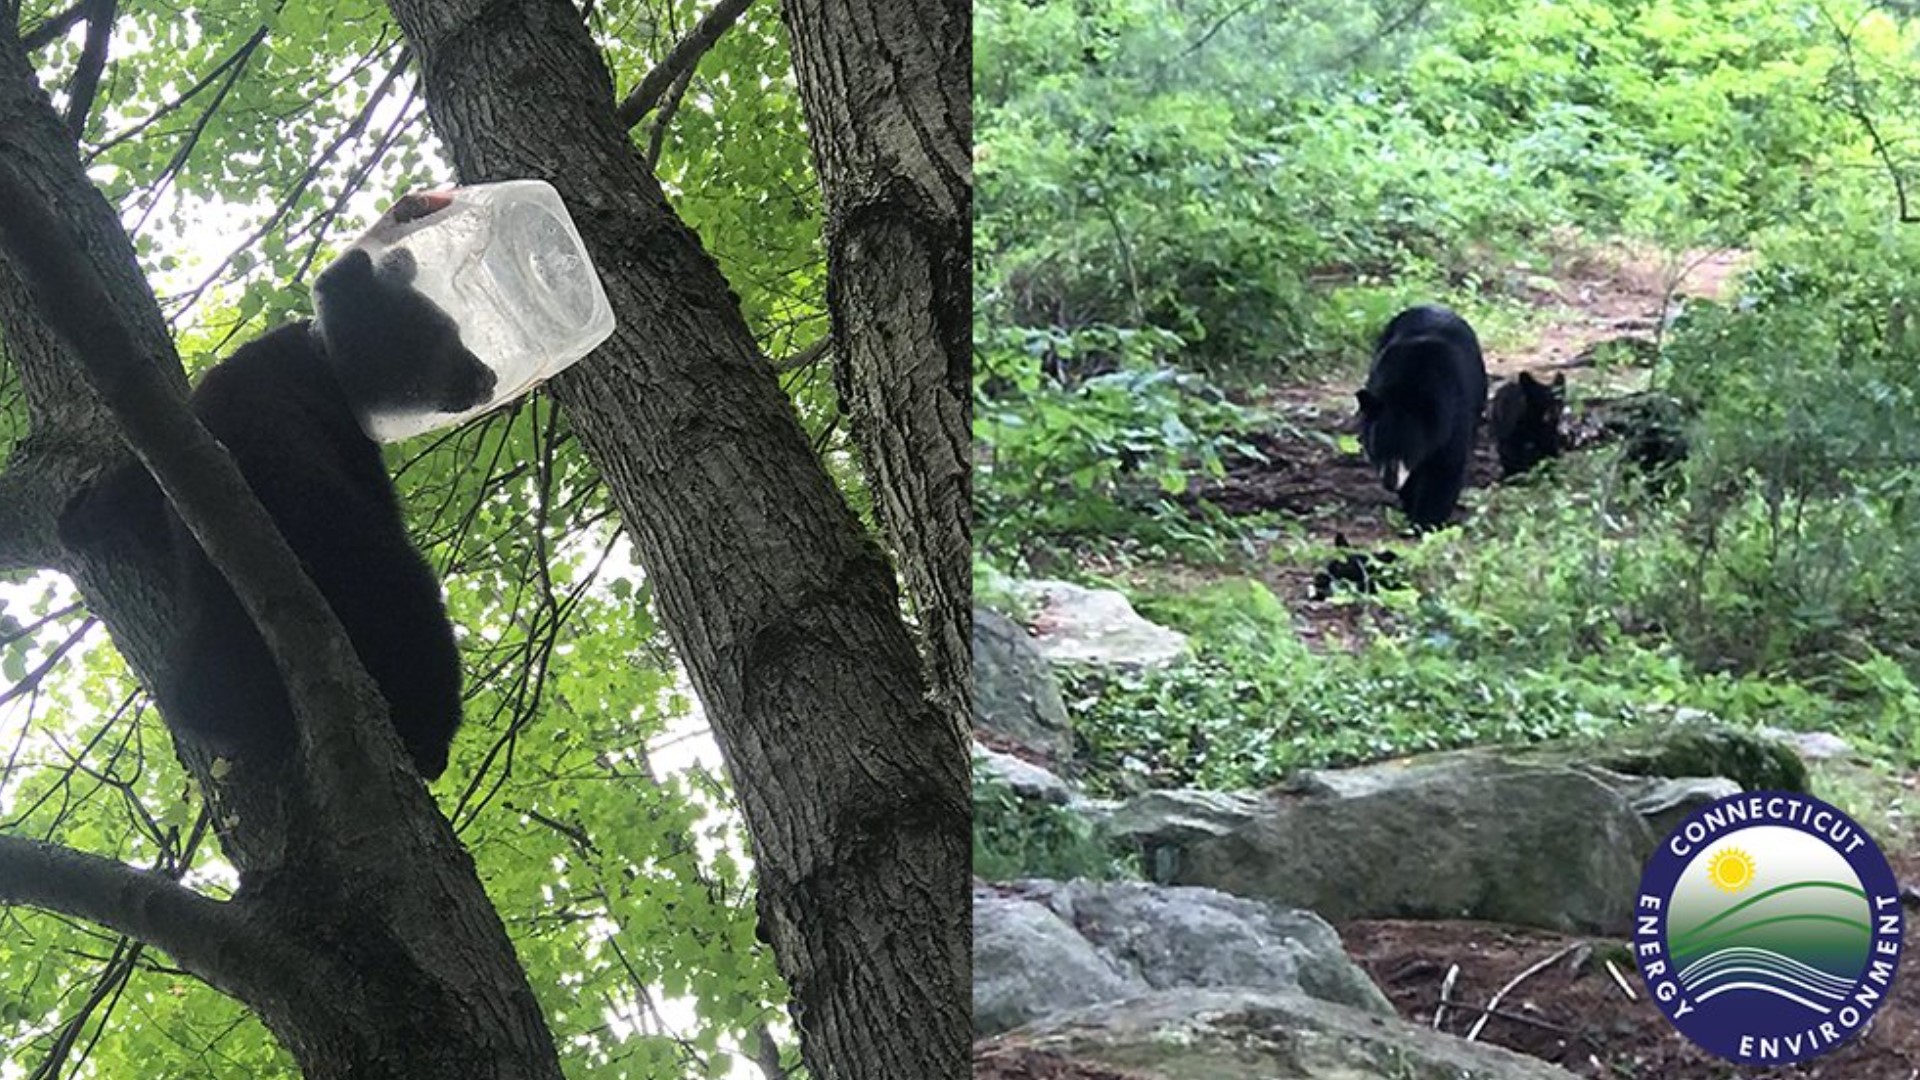 Wildlife biologists in Connecticut had to rescue a bear cub that got its head stuck in a plastic container, state wildlife officials said.